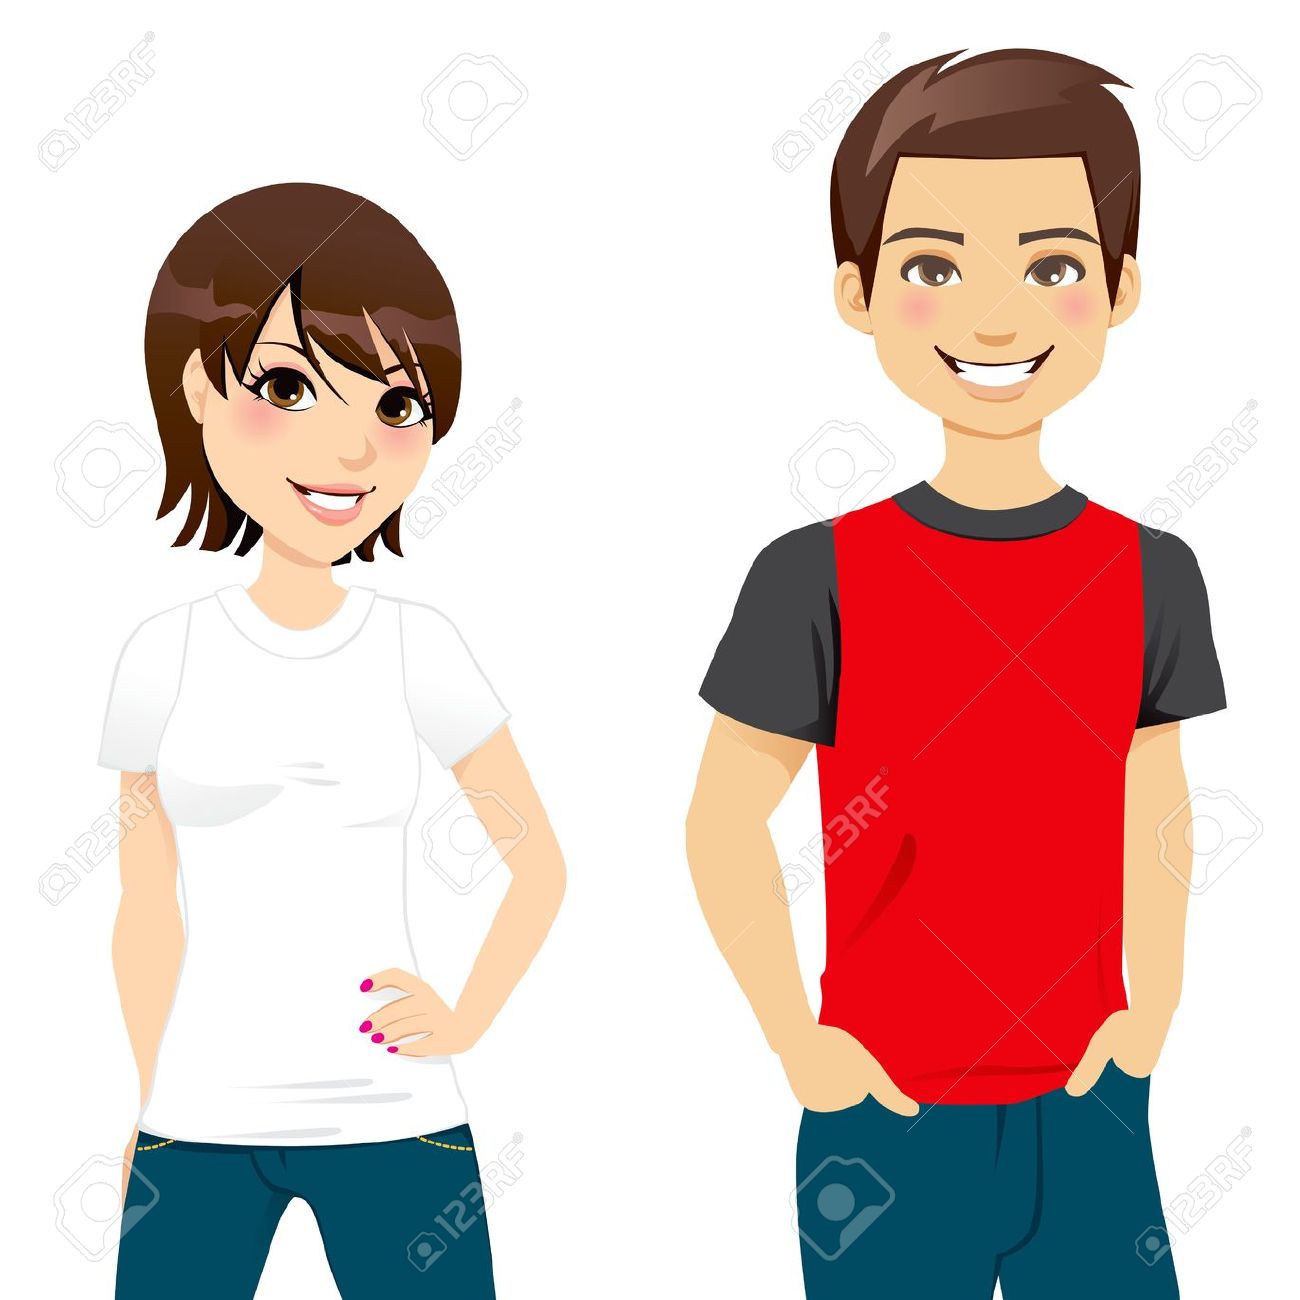 Teen clipart person. Free teenage guy cliparts